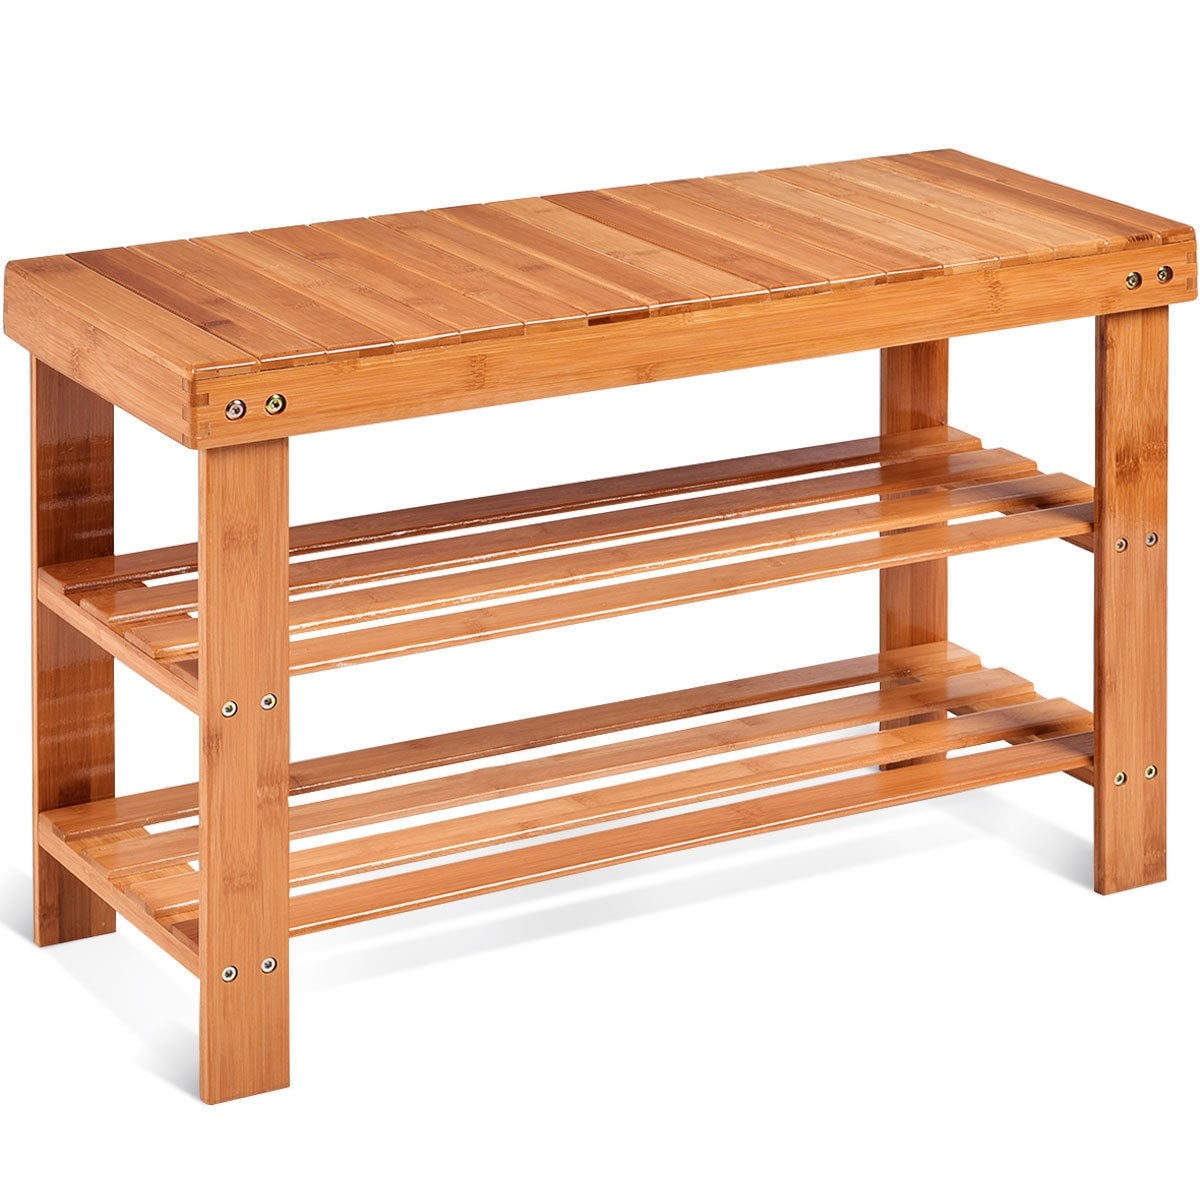 https://ak1.ostkcdn.com/images/products/is/images/direct/6f59cf6670688f2c4fcad5a27b2a16bffbed6d1a/Costway-3-Tier-Bamboo-Shoe-Rack-Bench-Storage-Shelf-Organizer-Entryway-Home-Furni.jpg